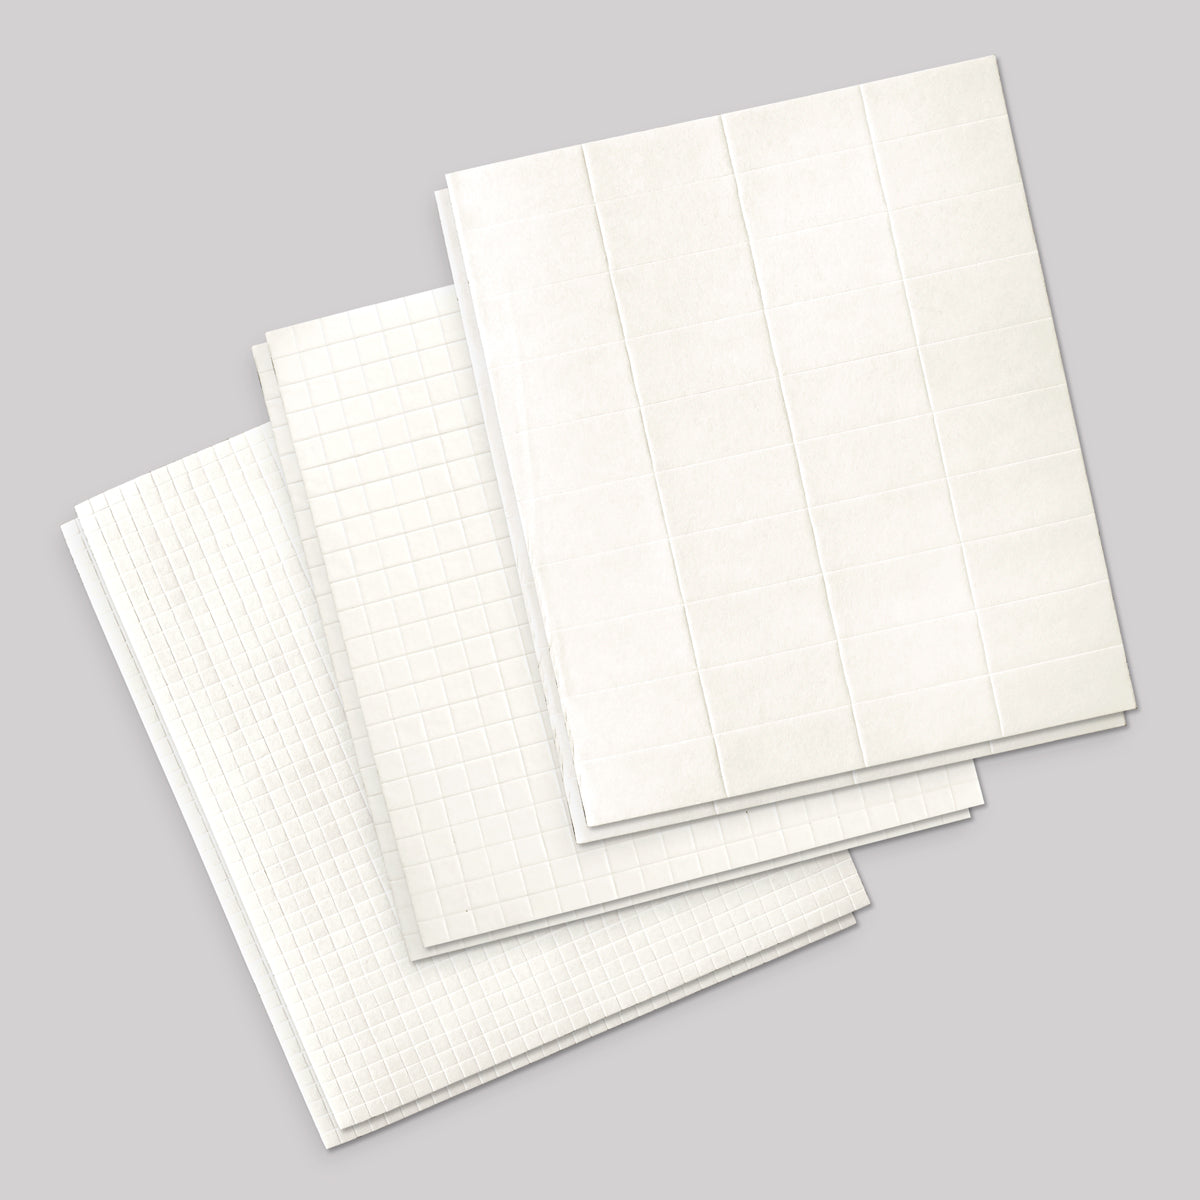 White Double Sided Adhesive Pads in 3 Different Sizes, pack of 6